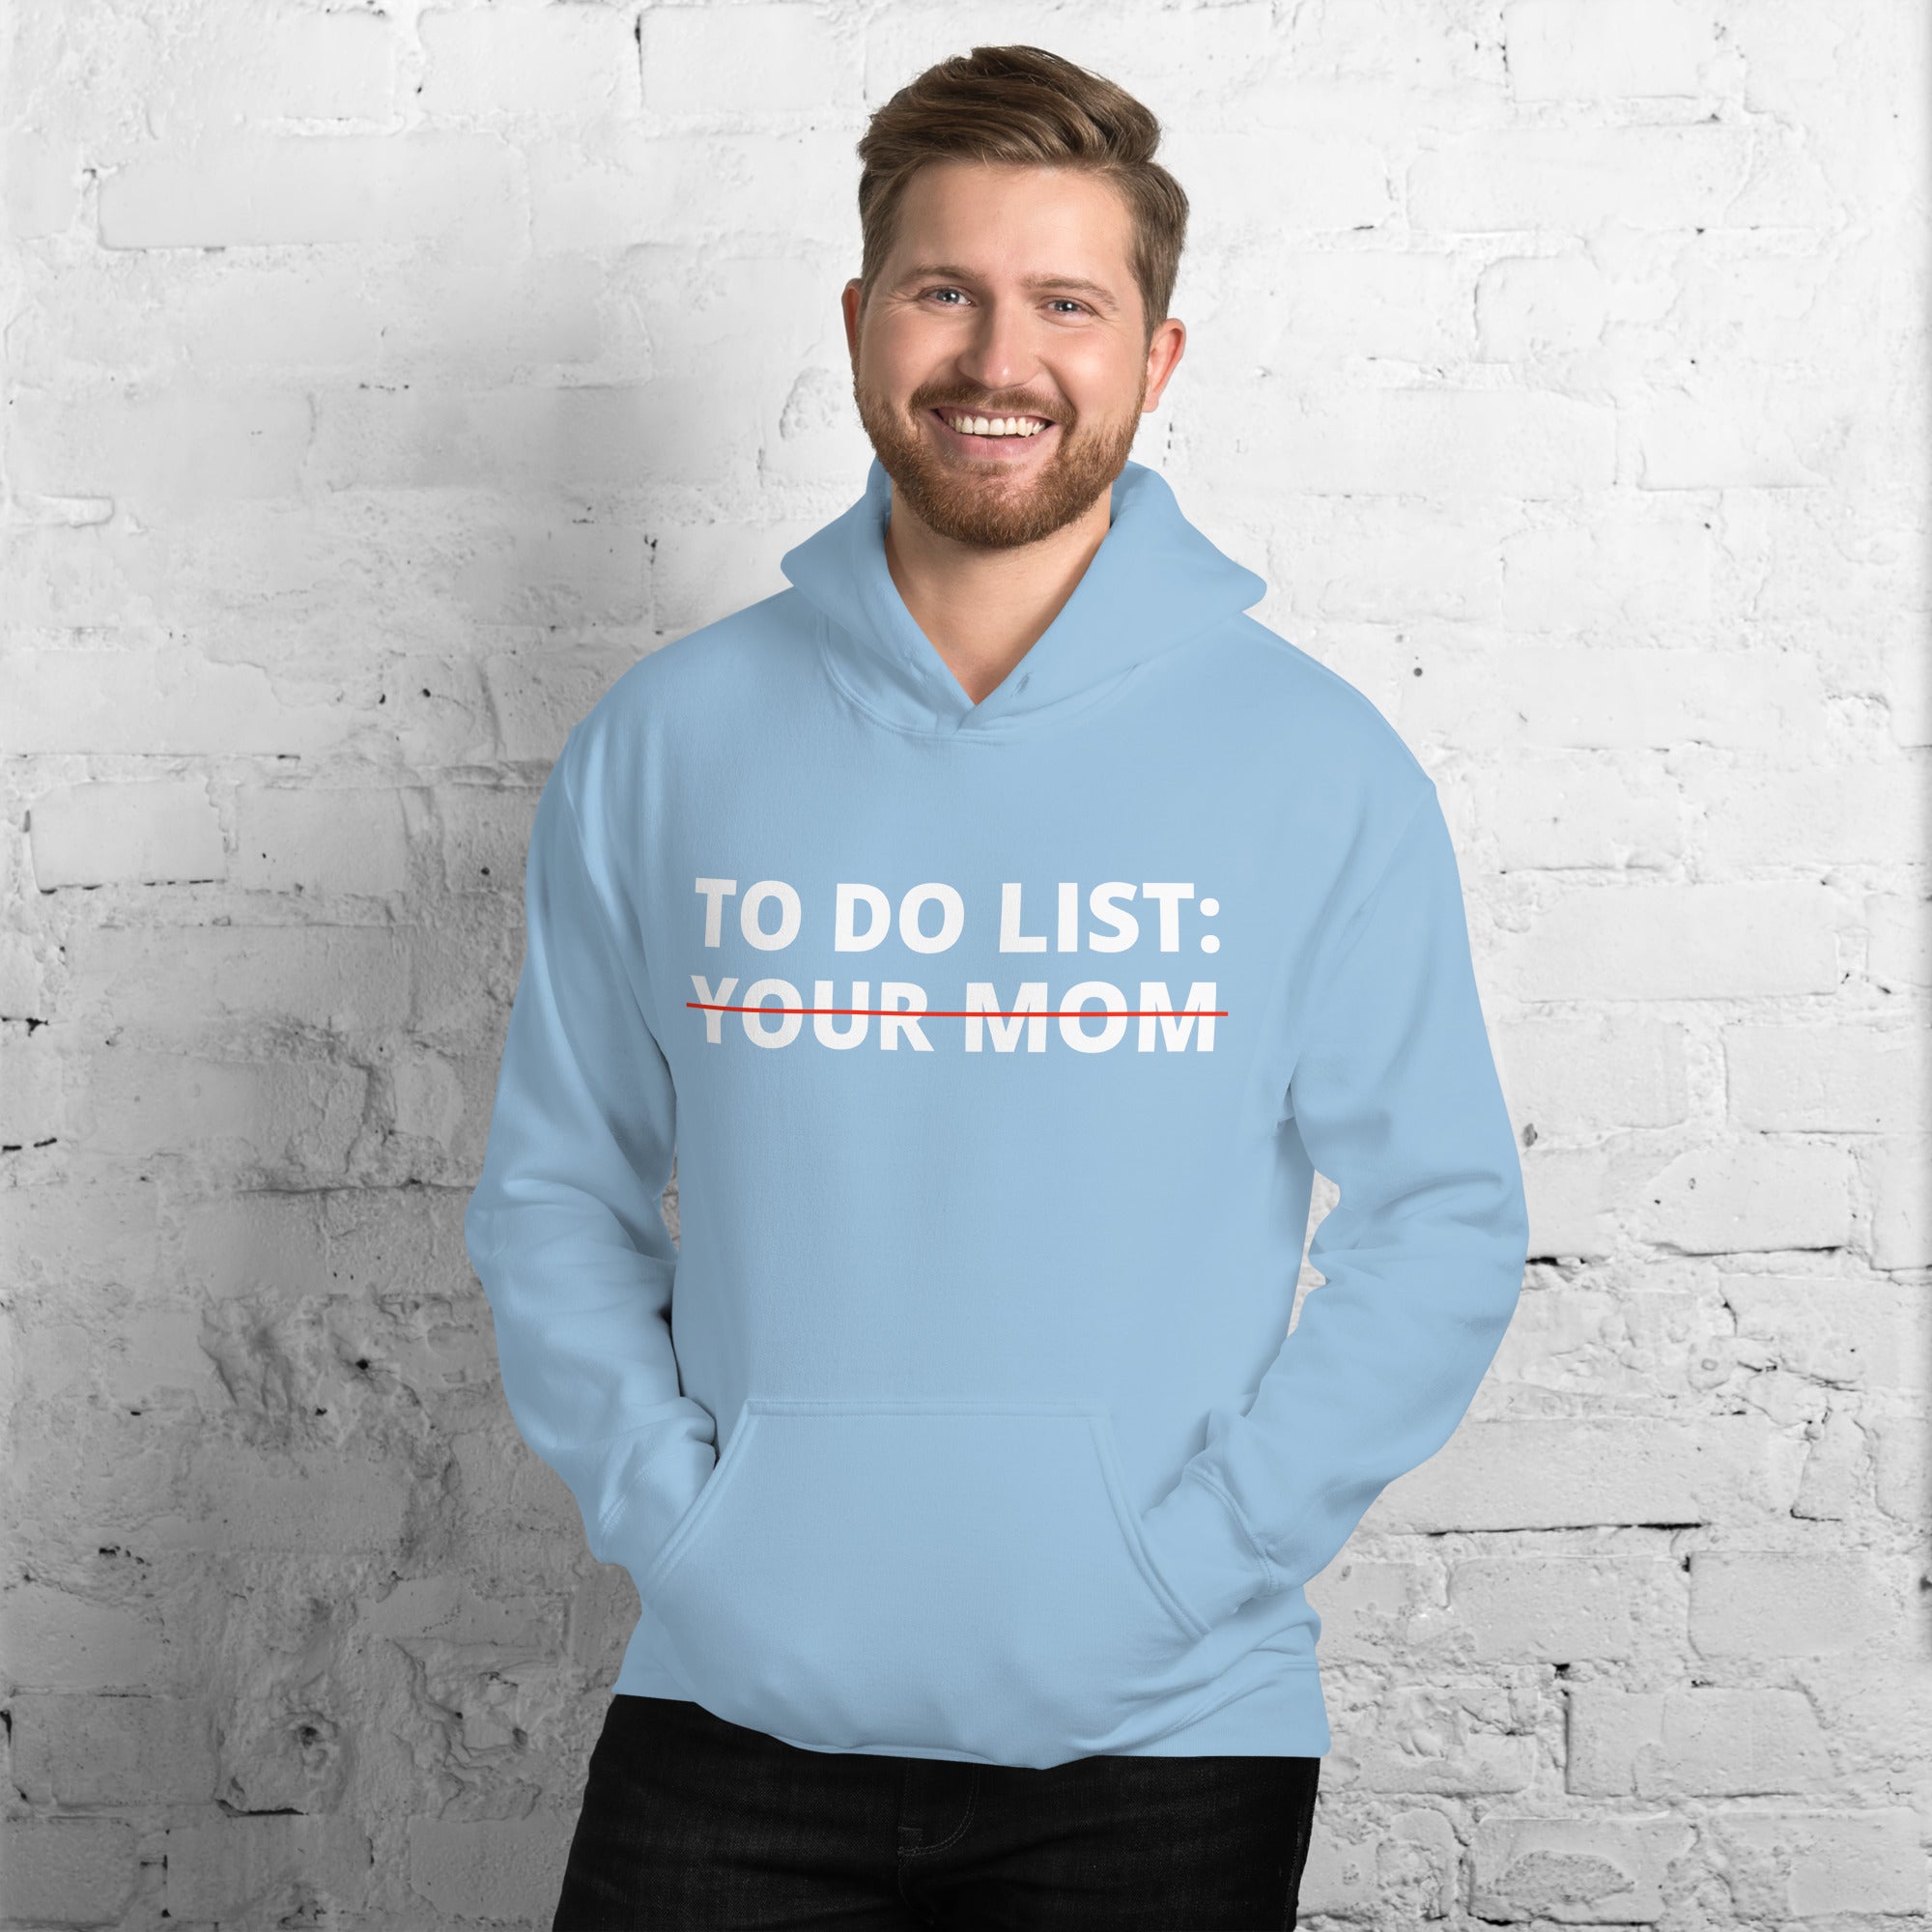 To Do List Your Mom, Funny Joke Hoodie, Sarcastic Shirt, Gag Hoodie, Sarcastic Sayings, Sarcasm Shirt, Sassy Gifts, Sarcastic Gifts for Men - Madeinsea©